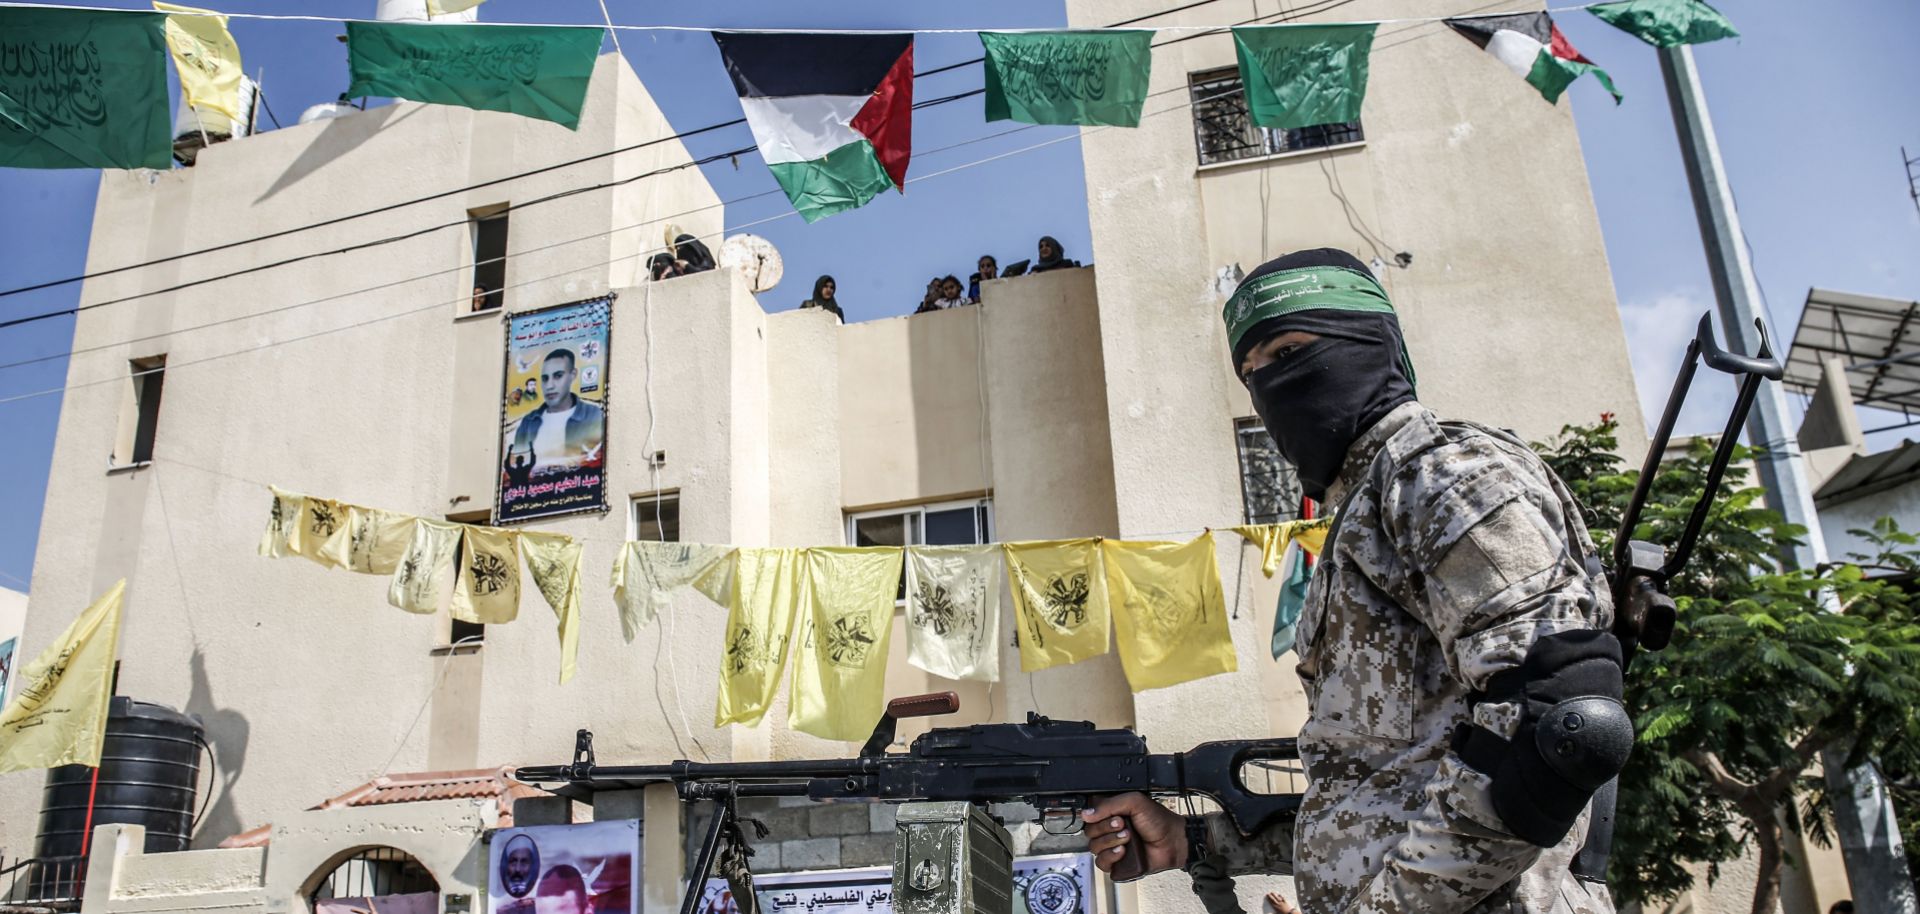 A masked Hamas militant mans a machine gun in the back of a pickup truck in the Palestinian city of Rafah, located in the southern Gaza Strip, on Oct. 17, 2019. The yellow flags of the Palestinian party Fatah can also be seen in the background. 